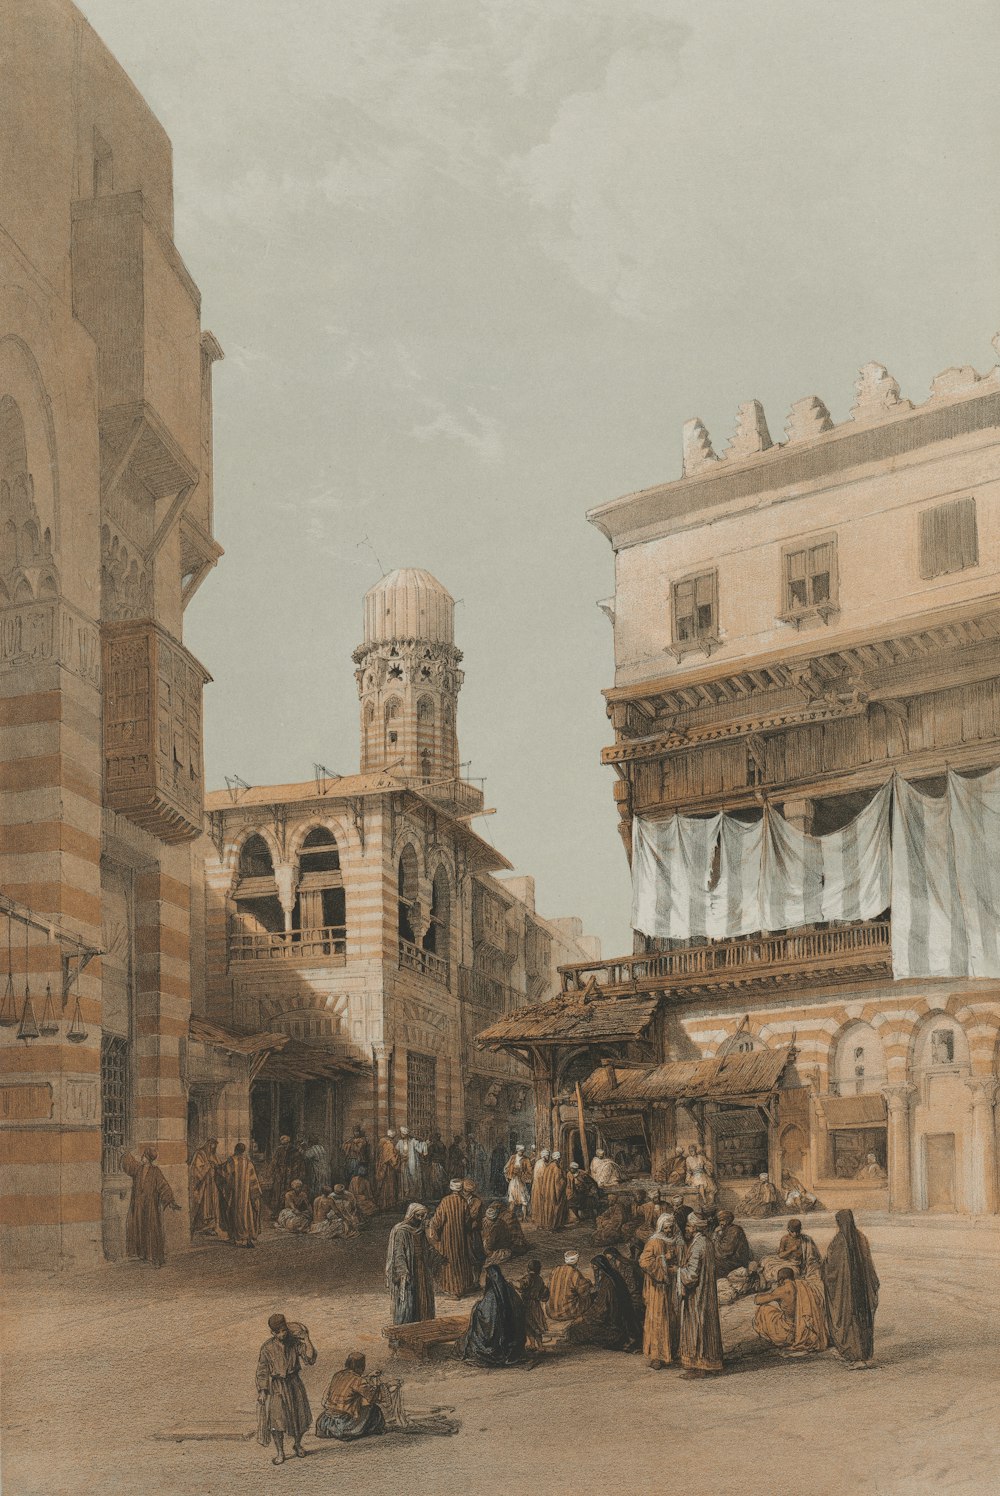 a painting of a street scene with people and buildings